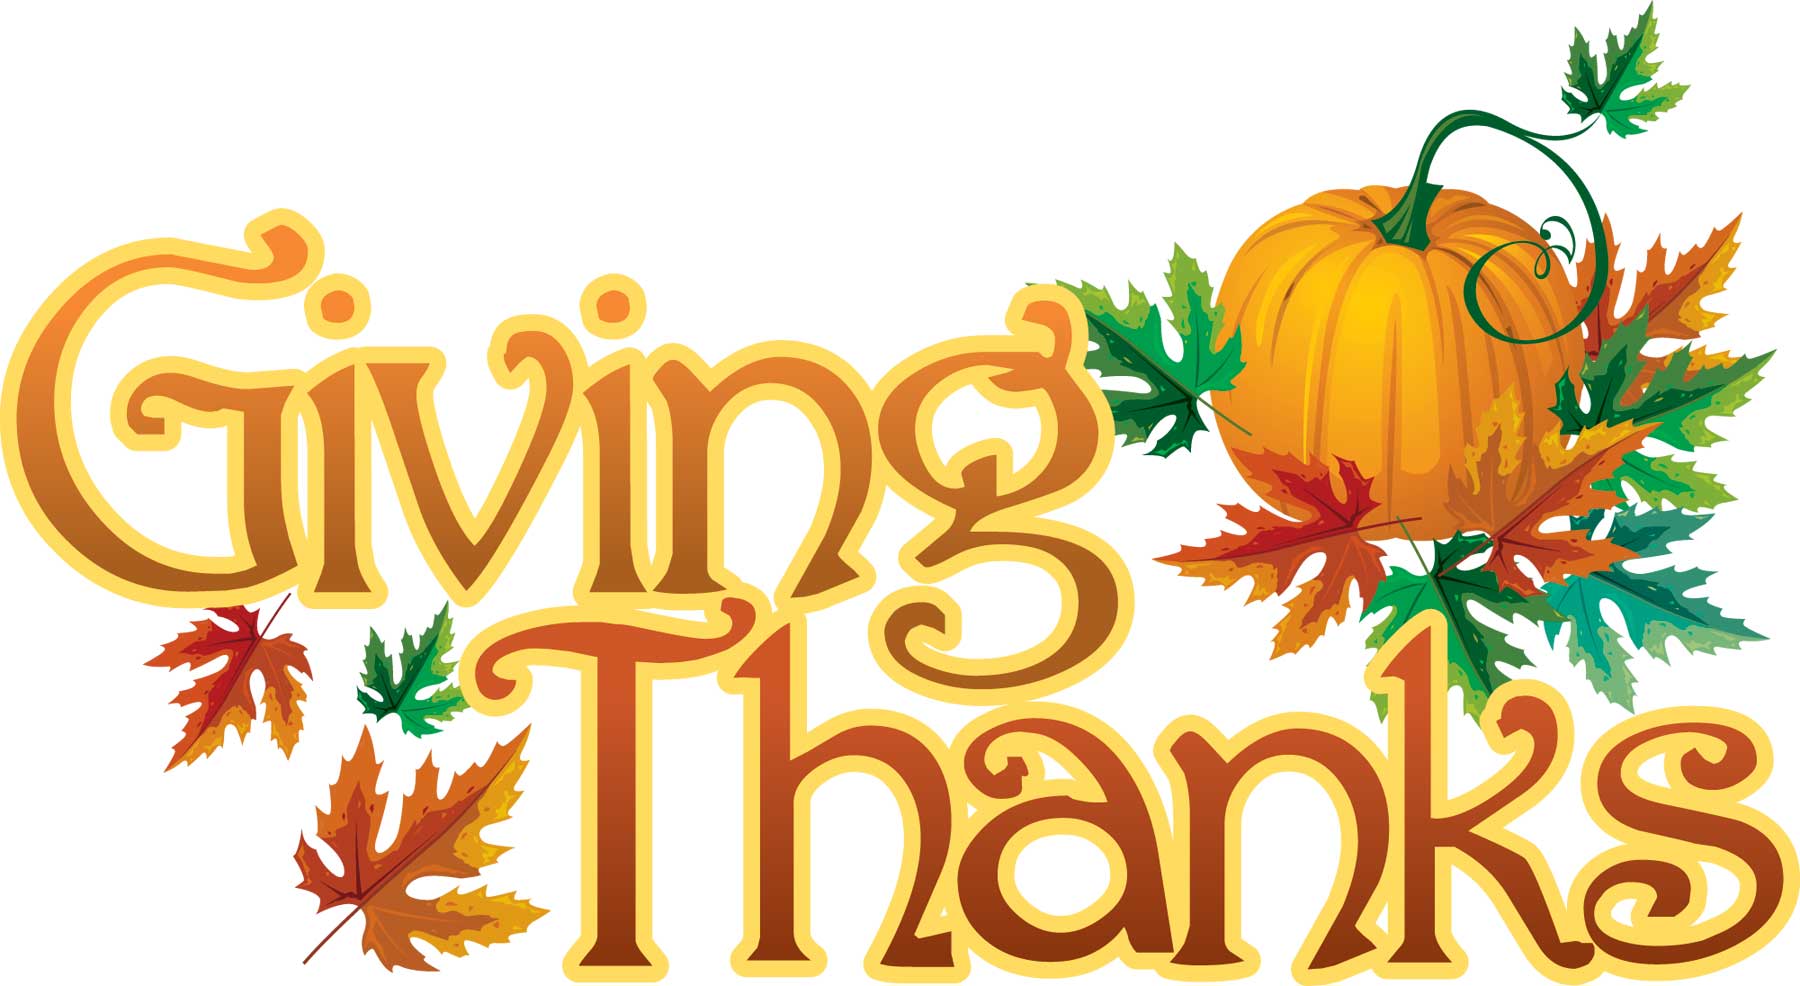 Give Thanks Thanksgiving Clipart